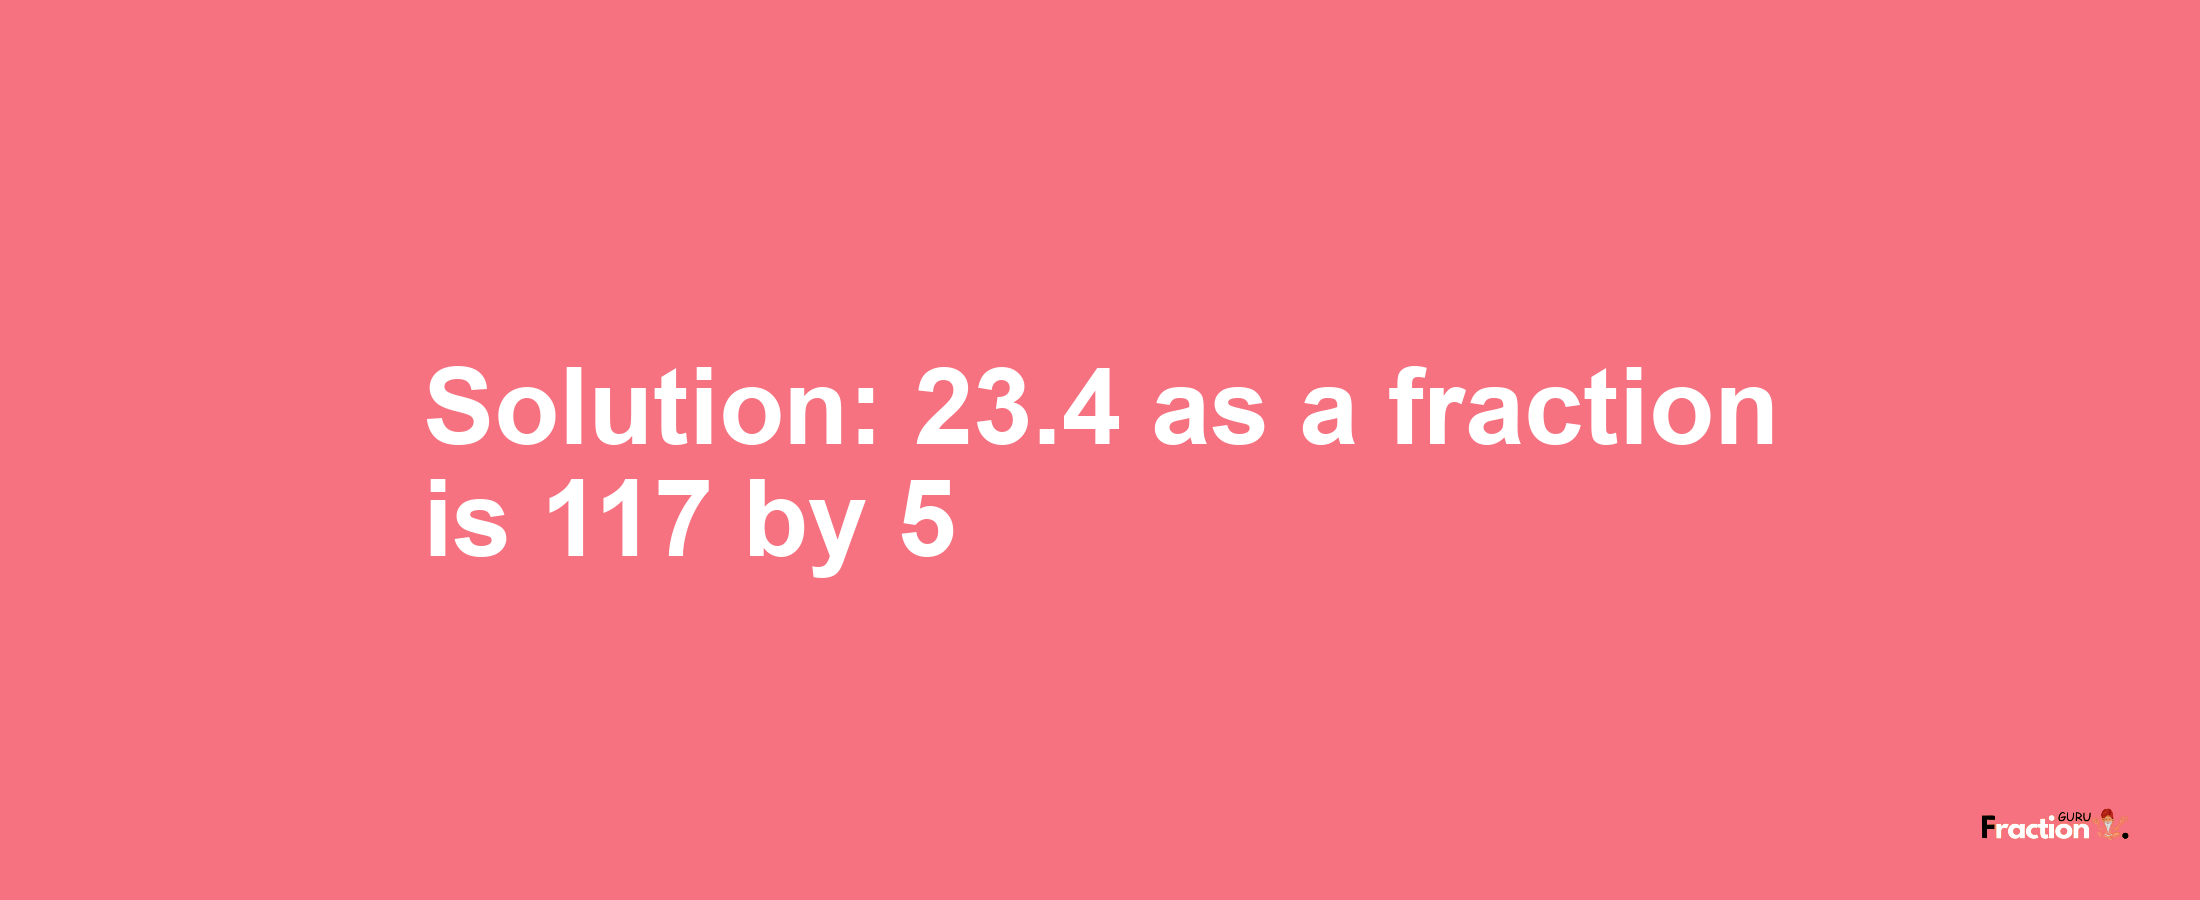 Solution:23.4 as a fraction is 117/5